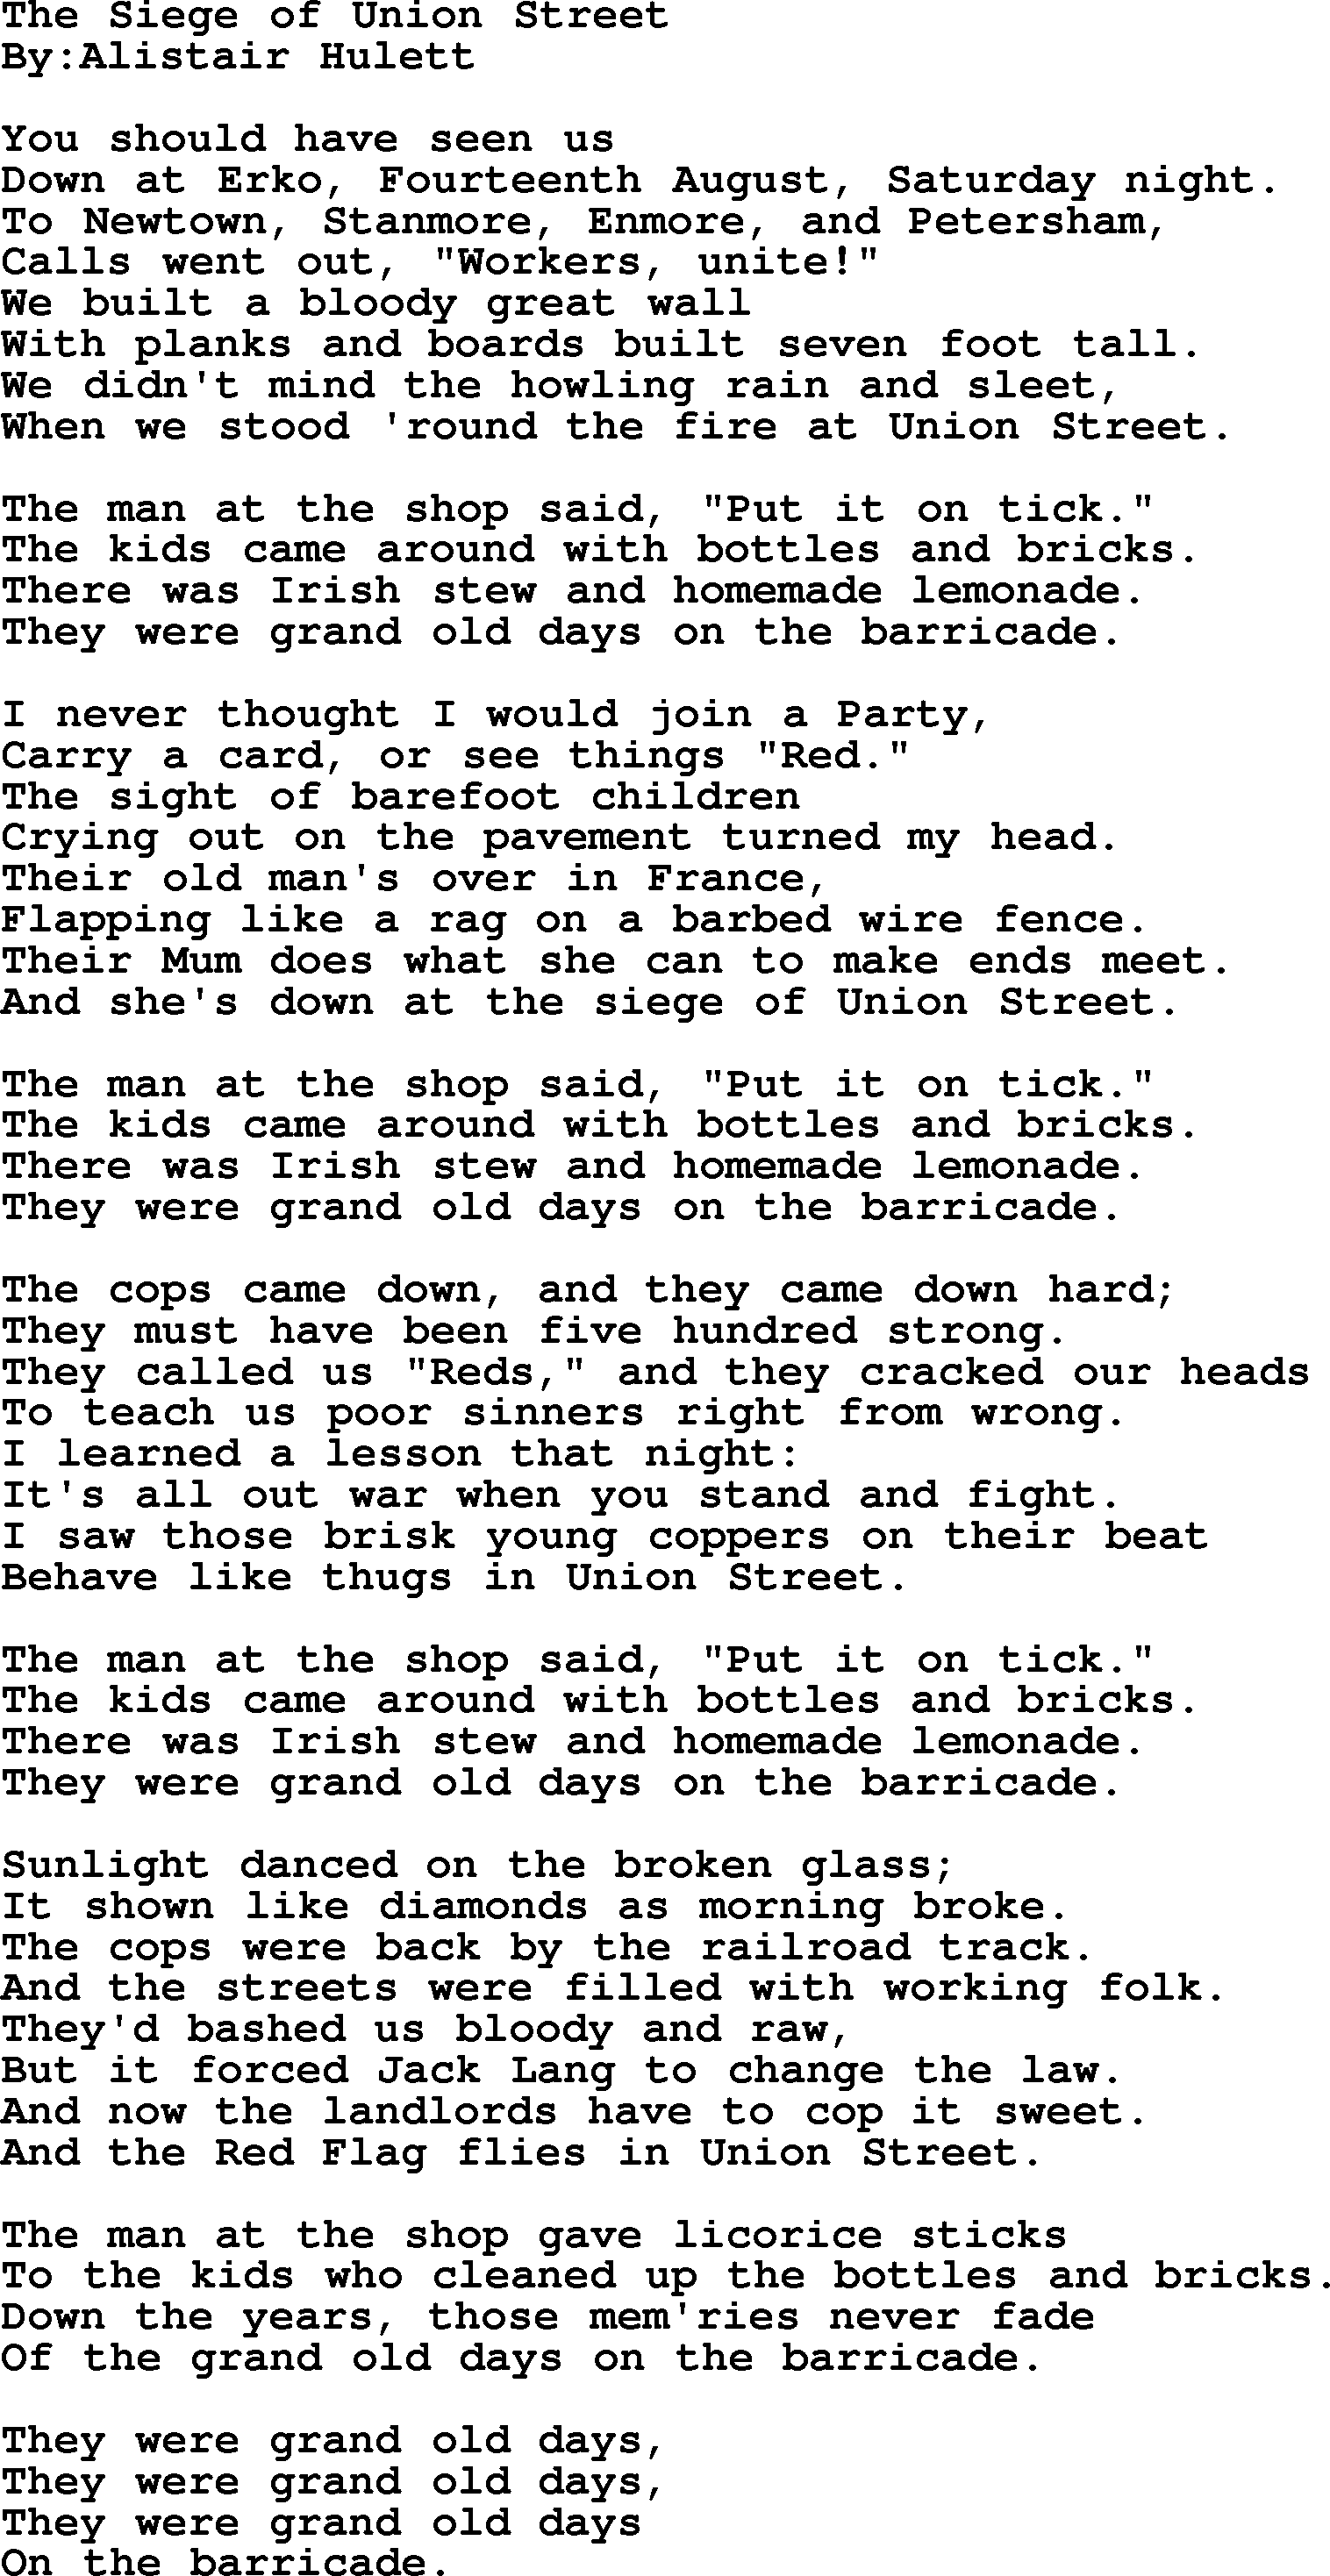 Political, Solidarity, Workers or Union song: The Siege Of Union Street, lyrics